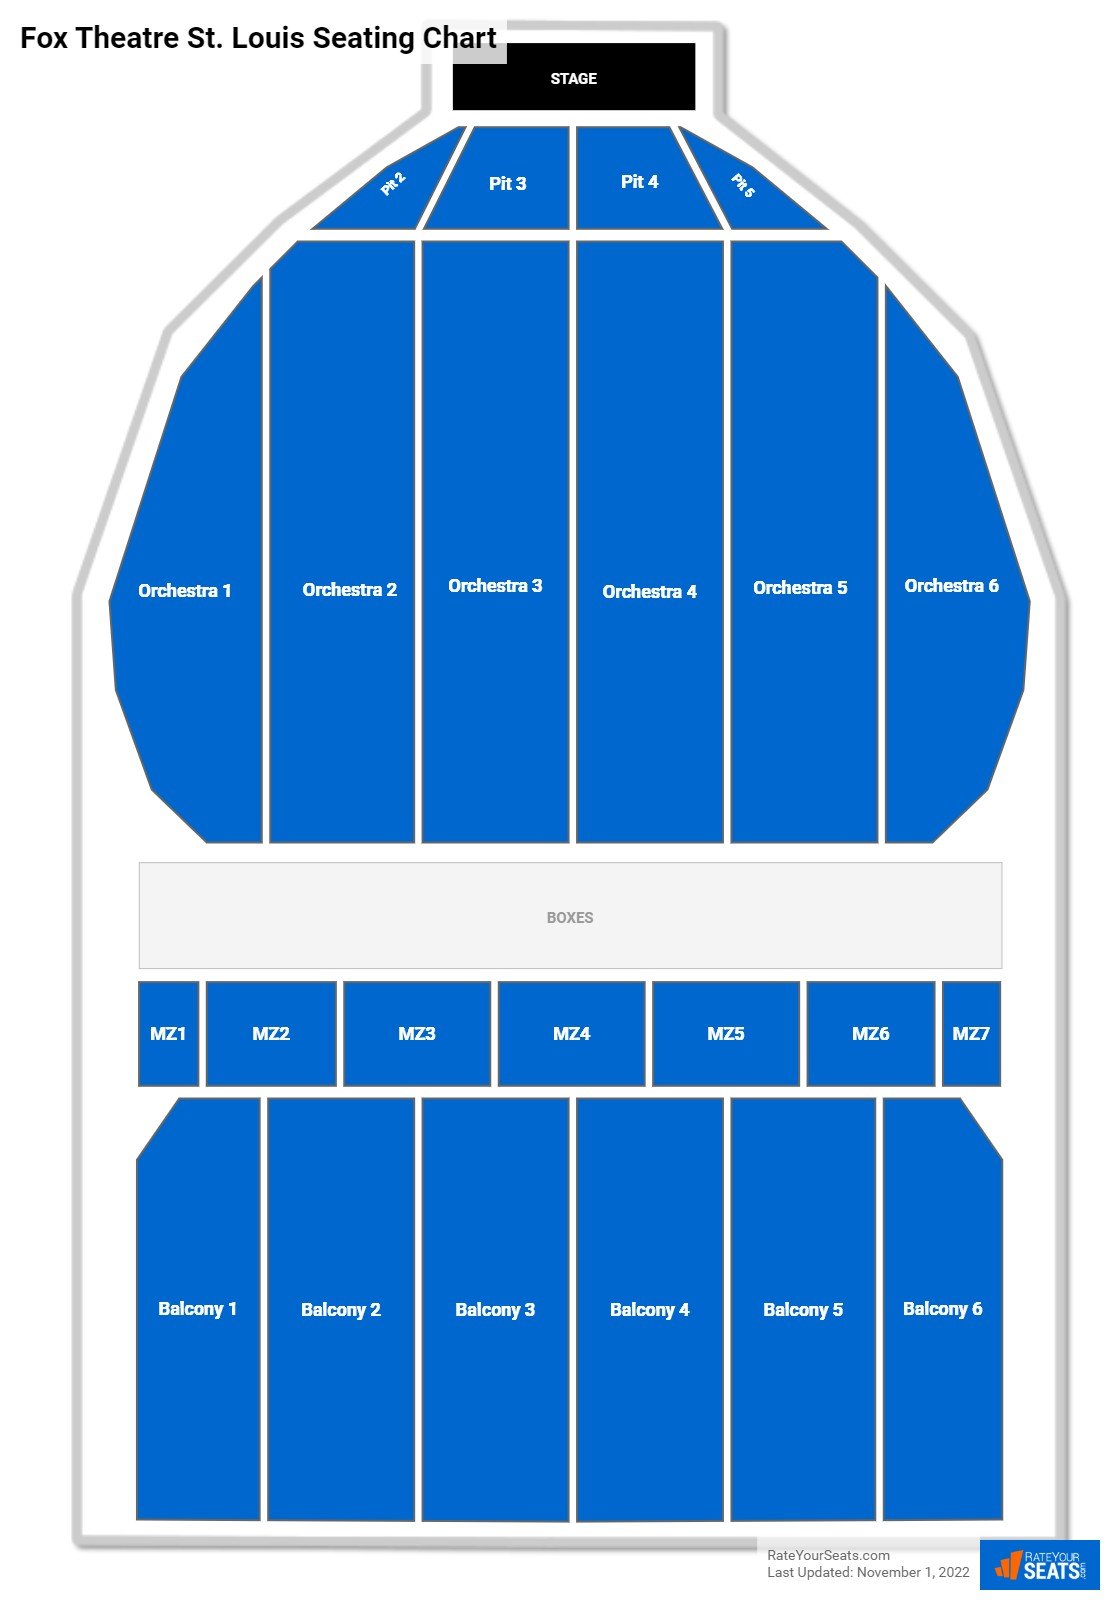 Fox Theatre St. Louis Theater Seating Chart